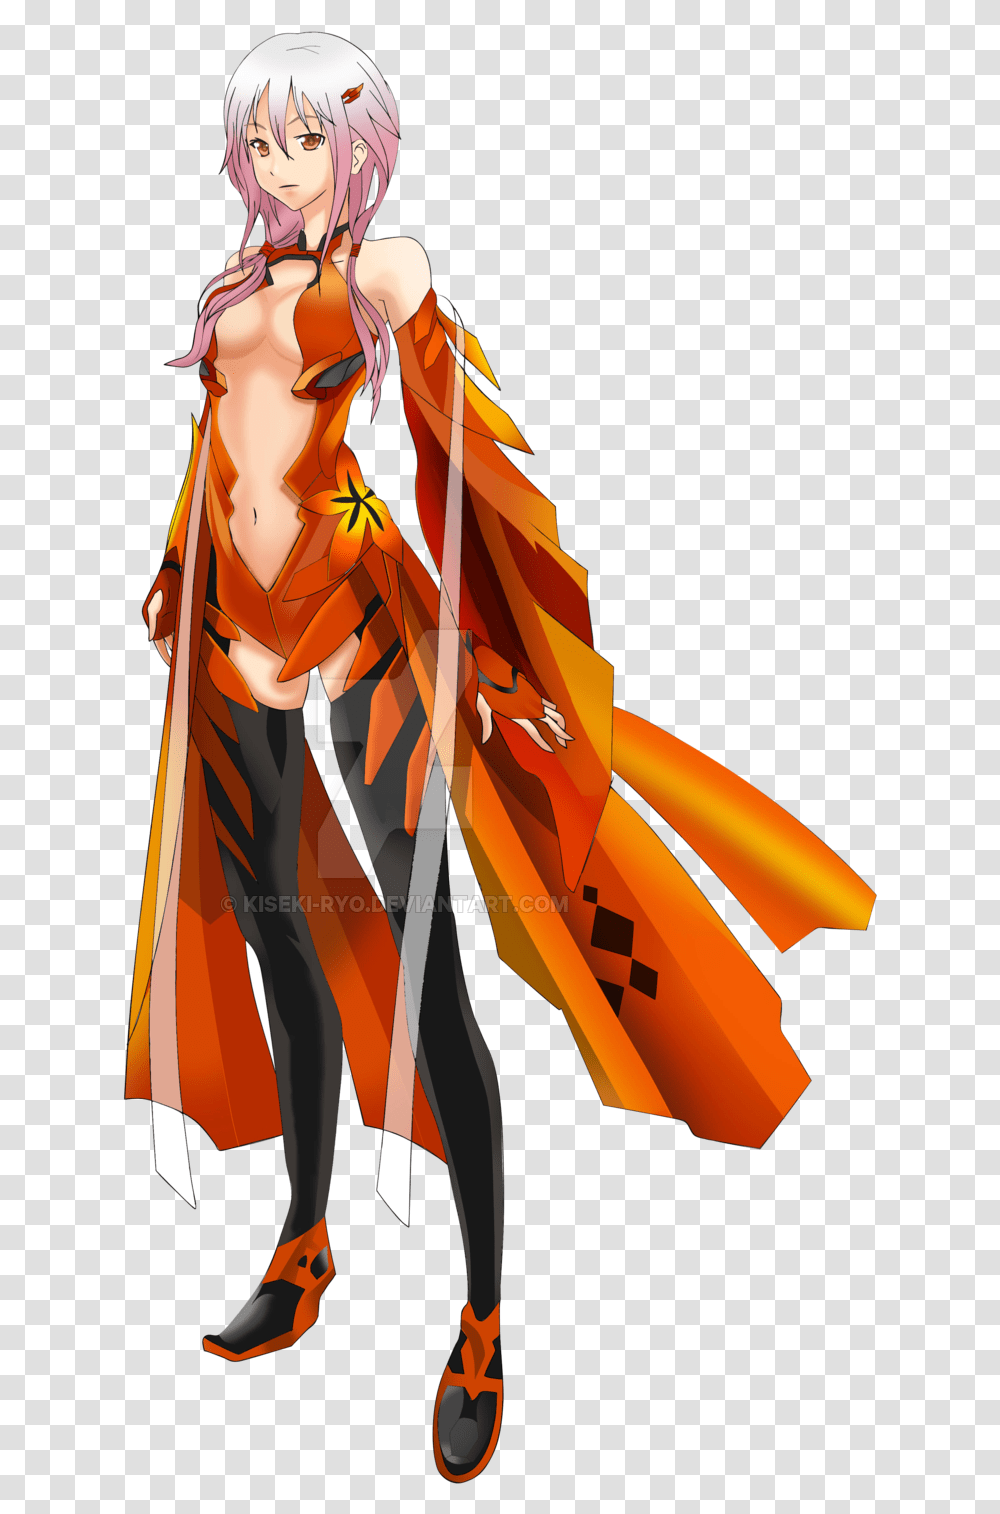 Download Guilty Crown Image Hq Freepngimg Inori Guilty Crown, Clothing, Apparel, Fashion, Robe Transparent Png